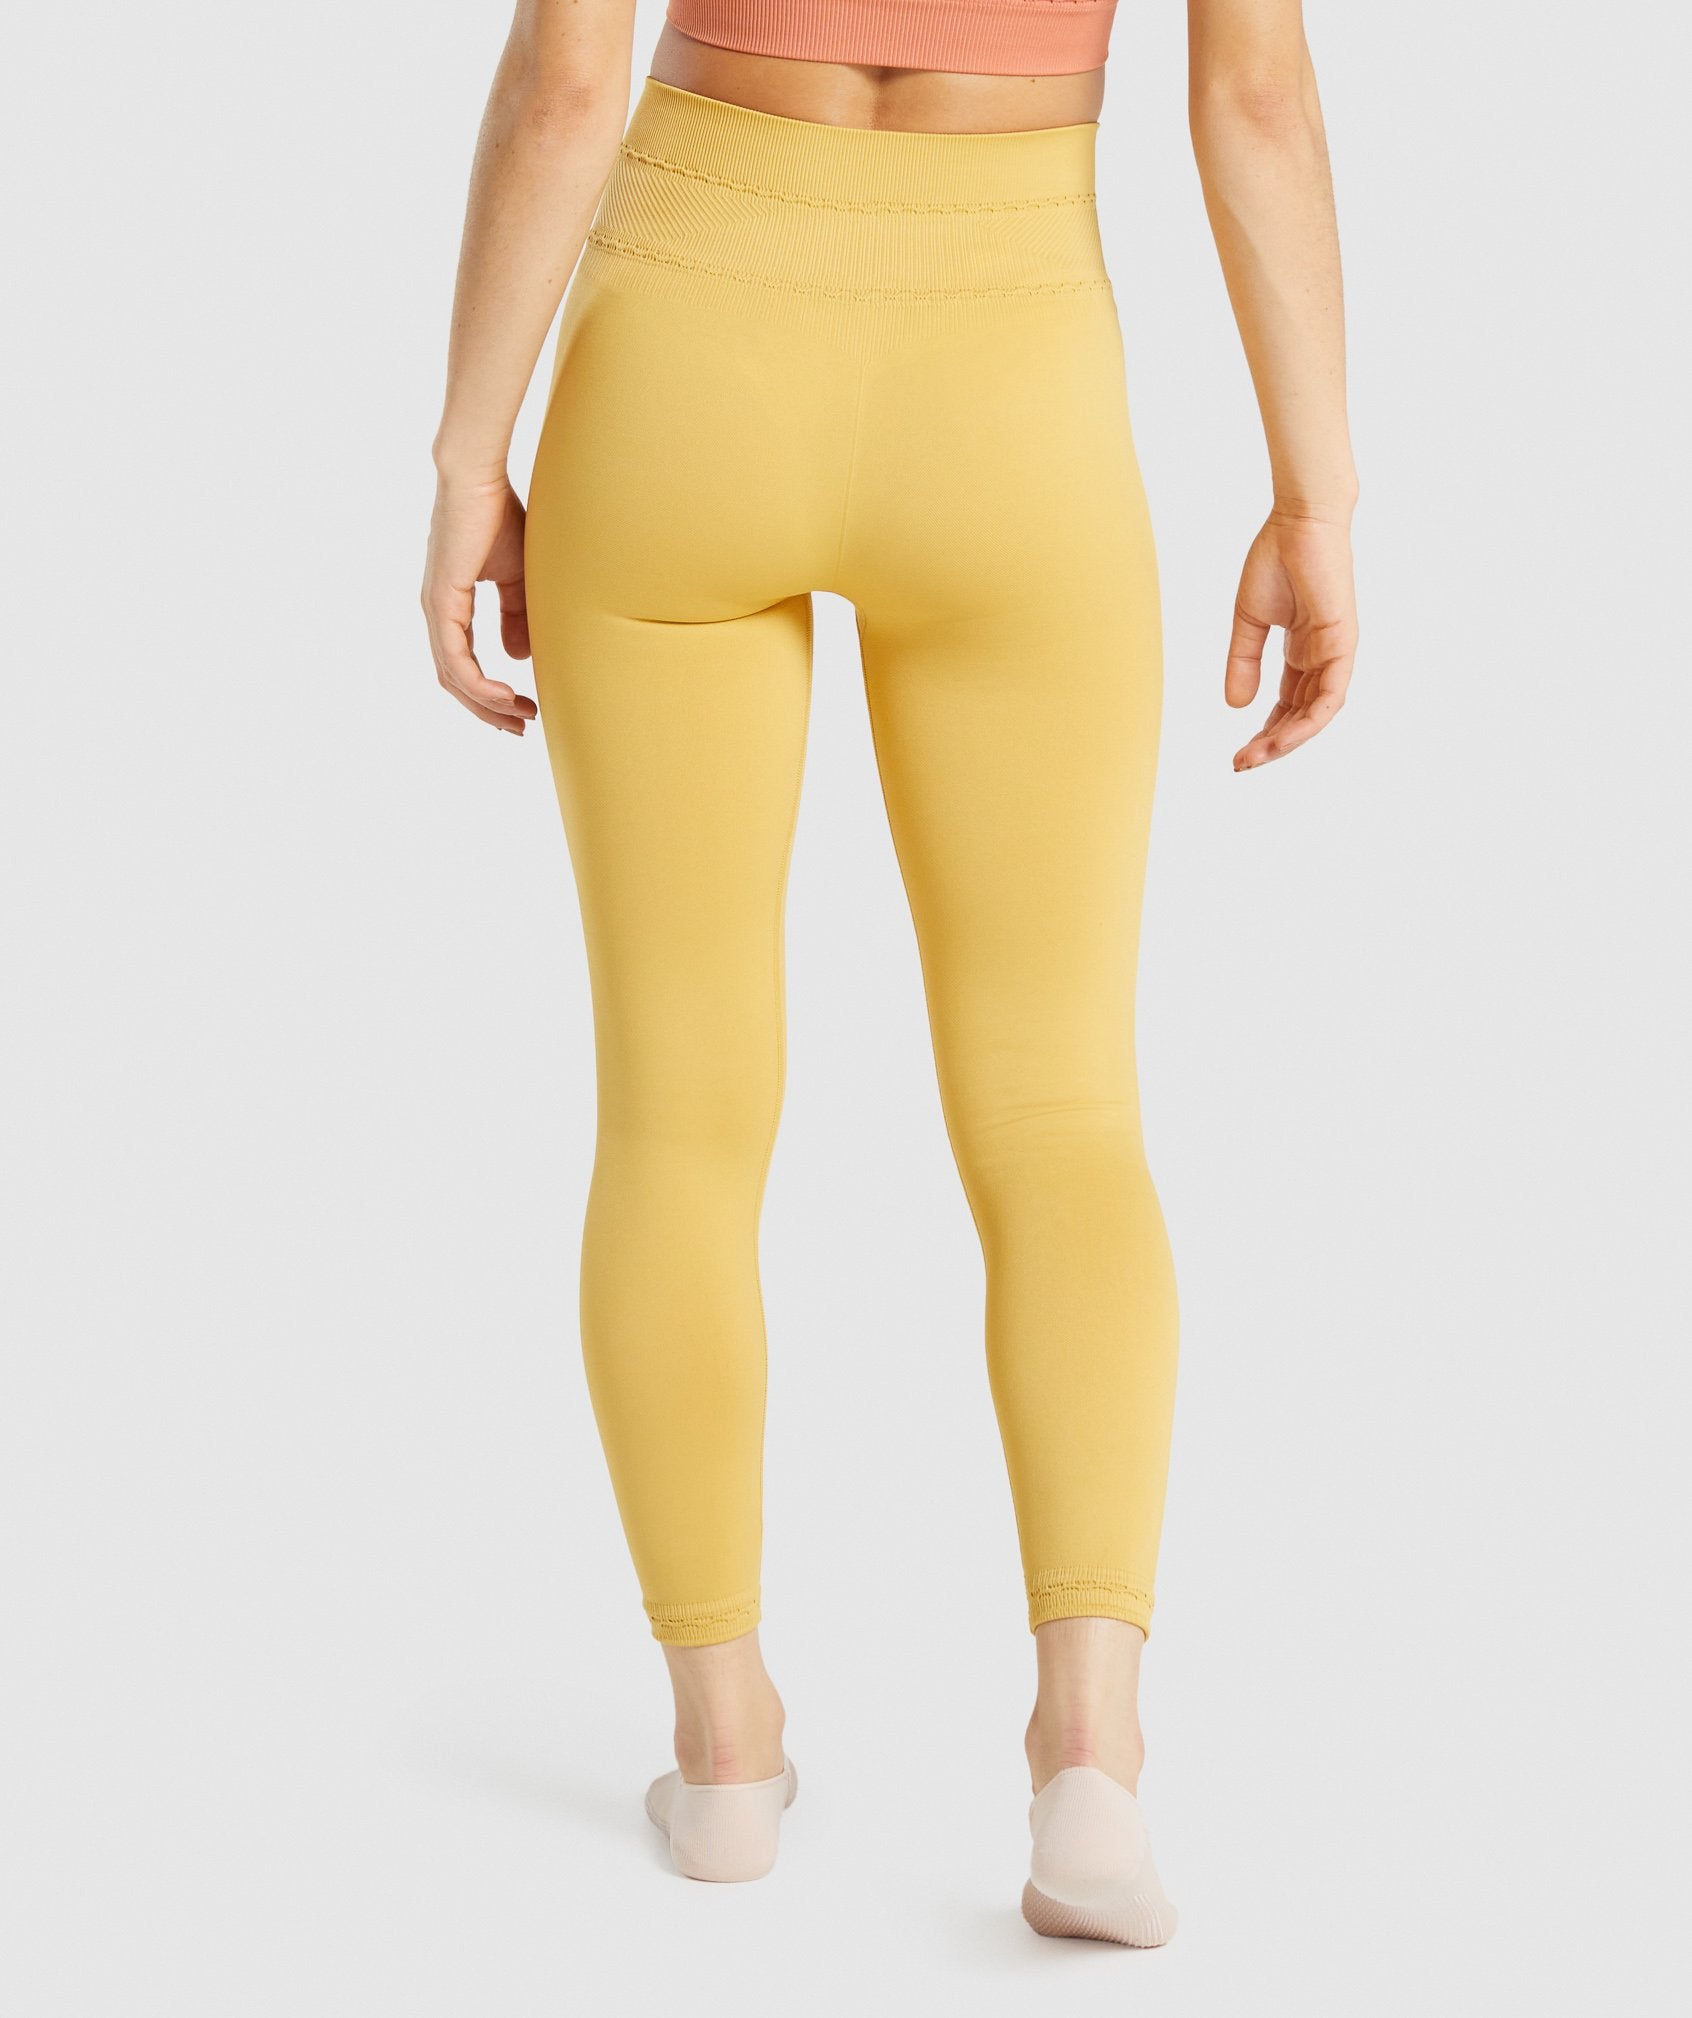 Gymshark Dreamy Leggings 2.0 - Citrus Yellow 2  Outfits with leggings,  Fitness leggings women, Yellow leggings